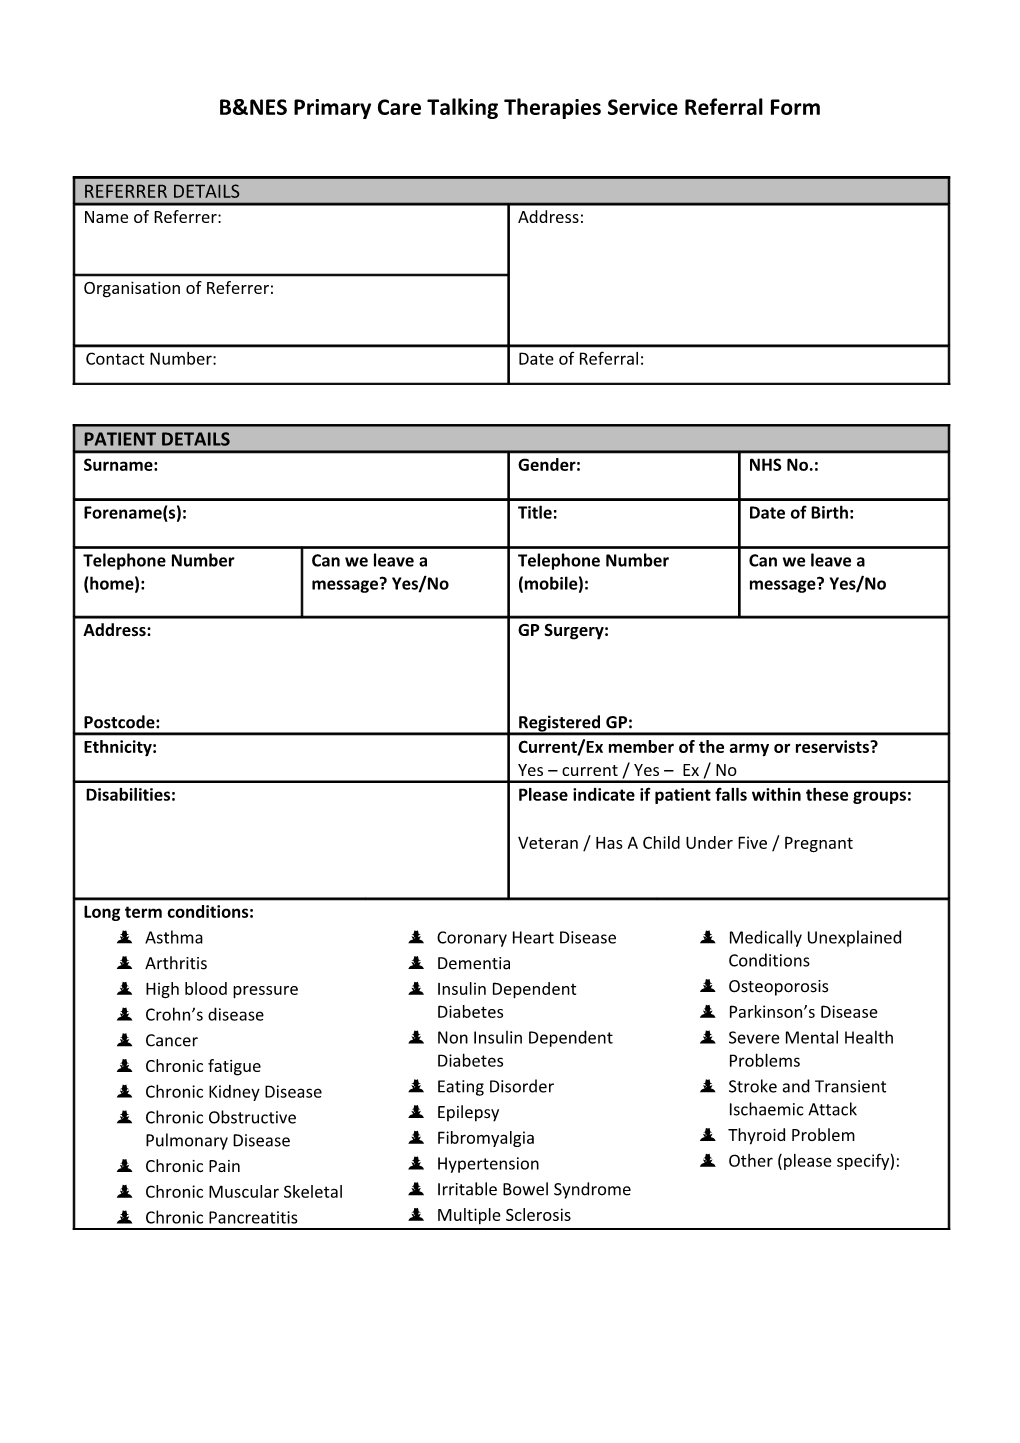 B&NES Primary Care Talking Therapies Service Referral Form